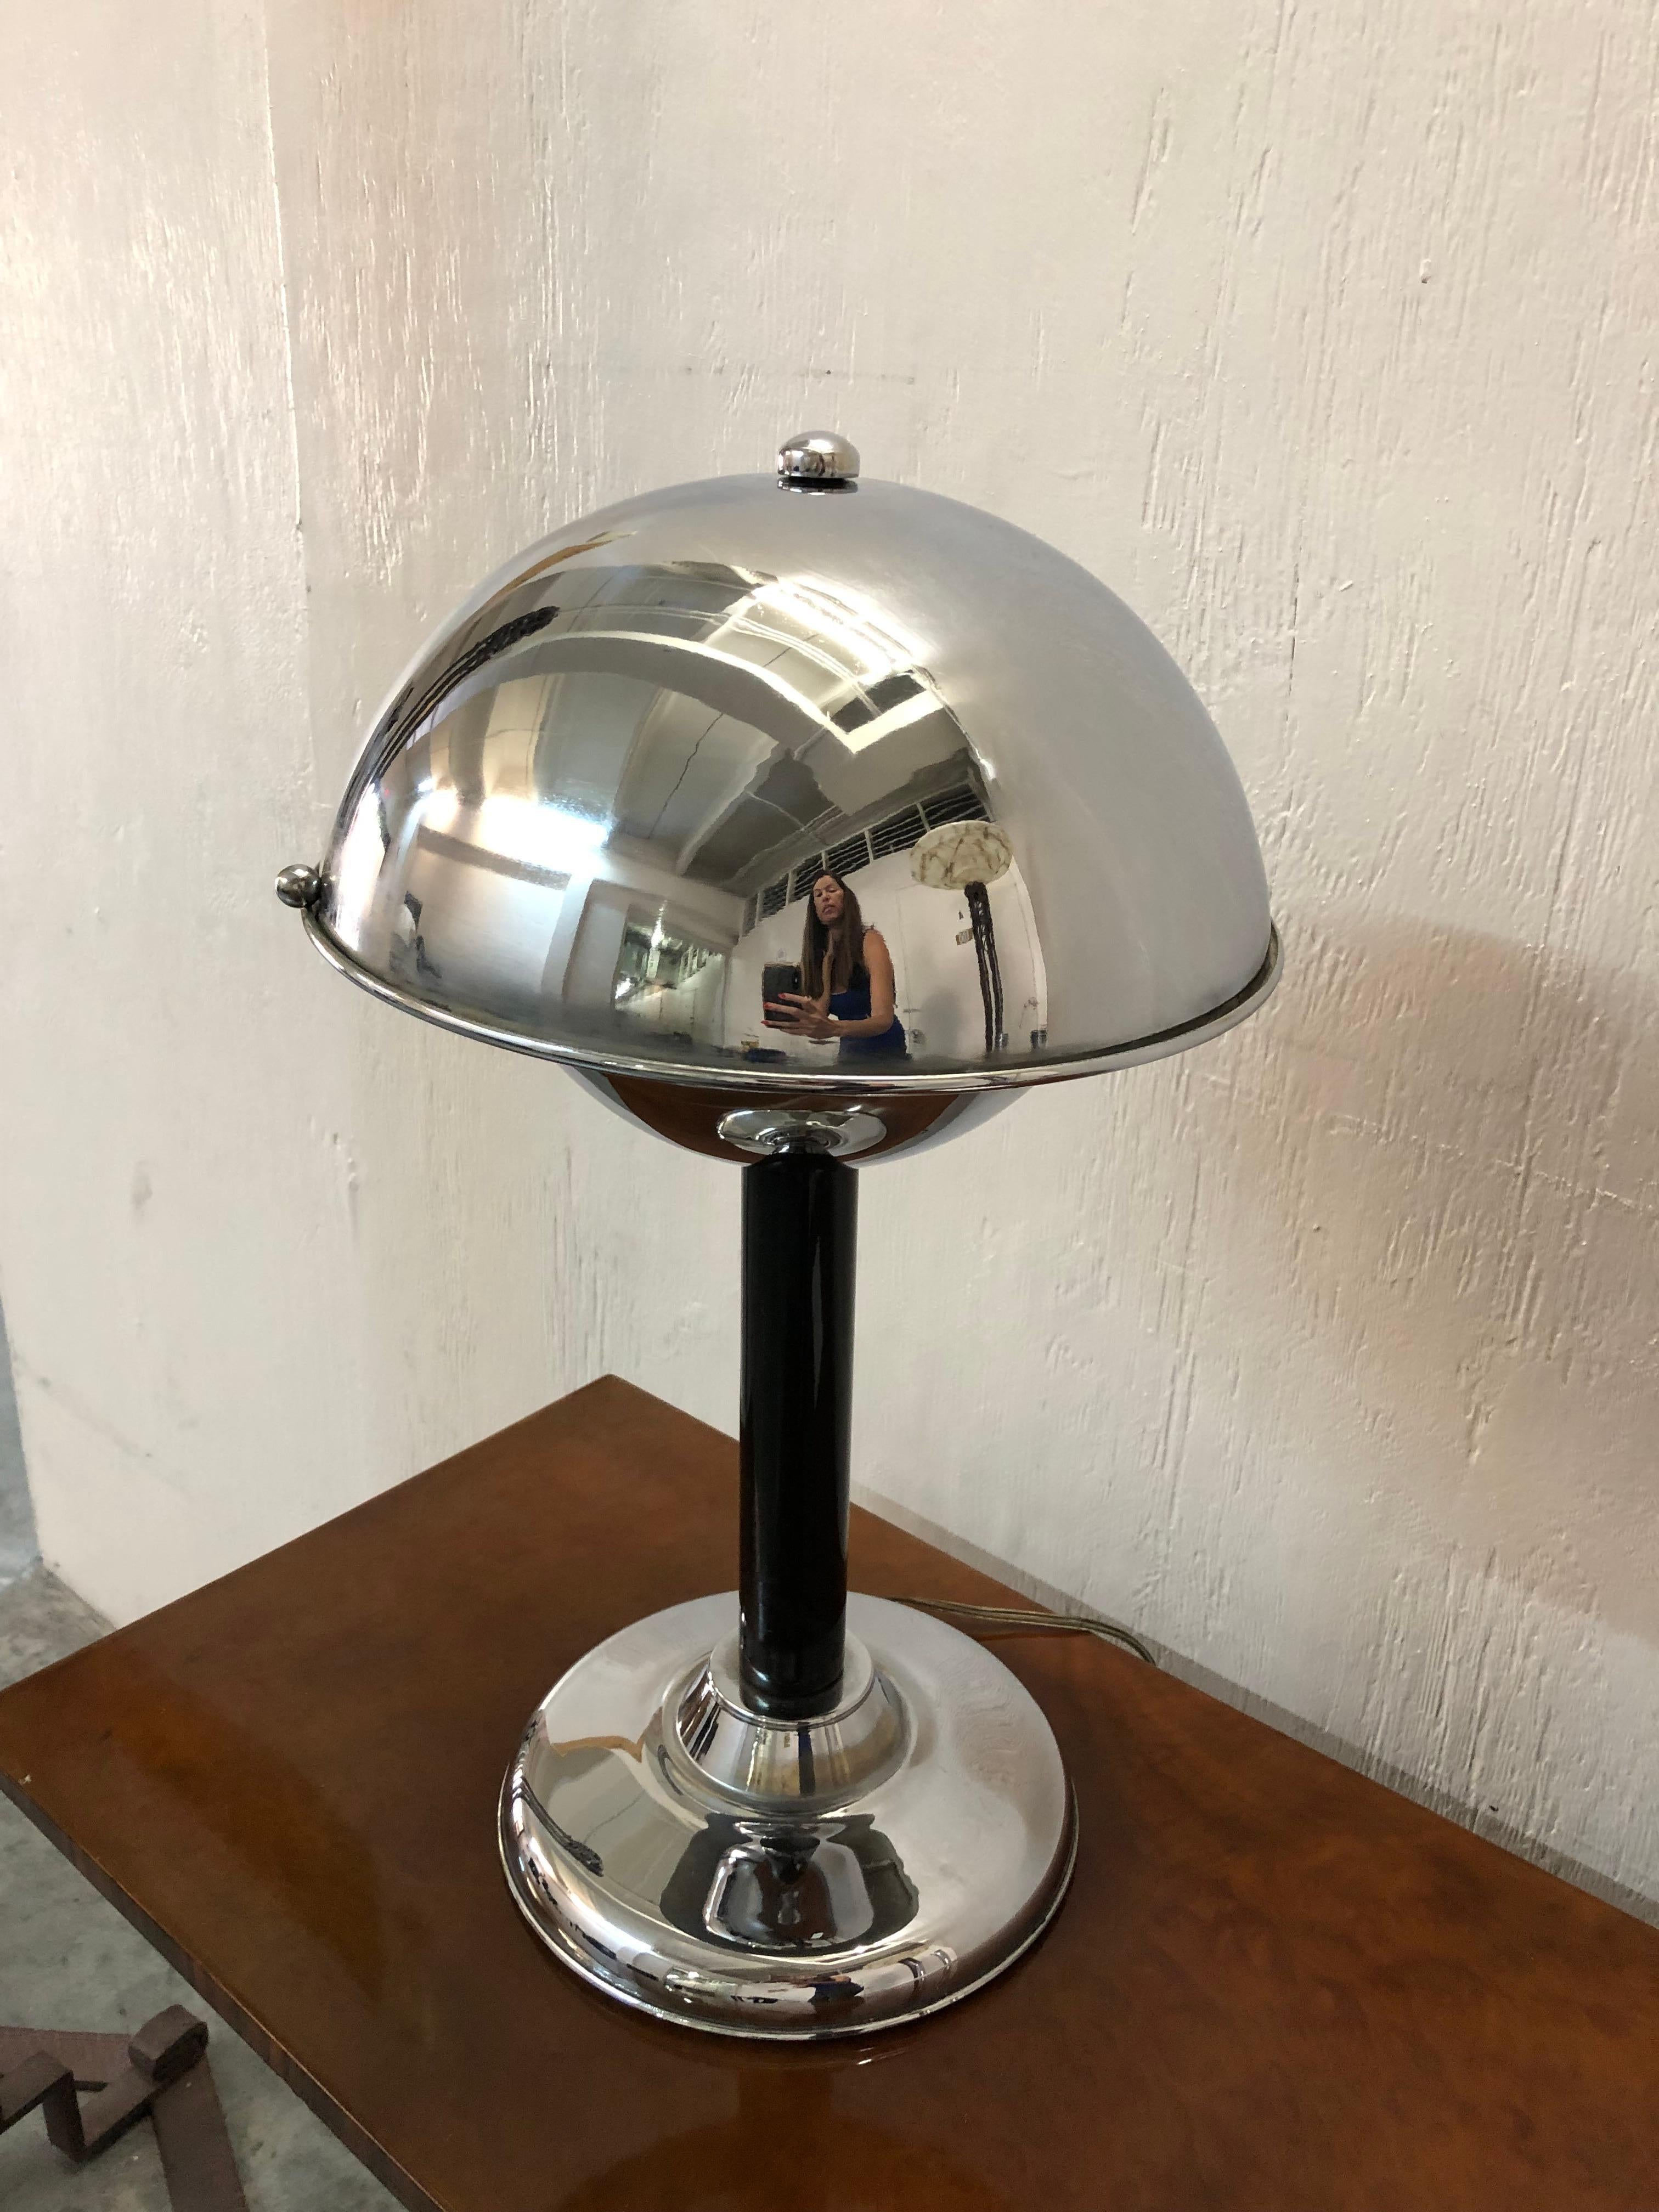 Lamp Art Deco
Materia: Chrome and wood
Style: Art Deco
Country: France
To take care of your property and the lives of our customers, the new wiring has been done.
If you want to live in the golden years, this is the table lamp that your project